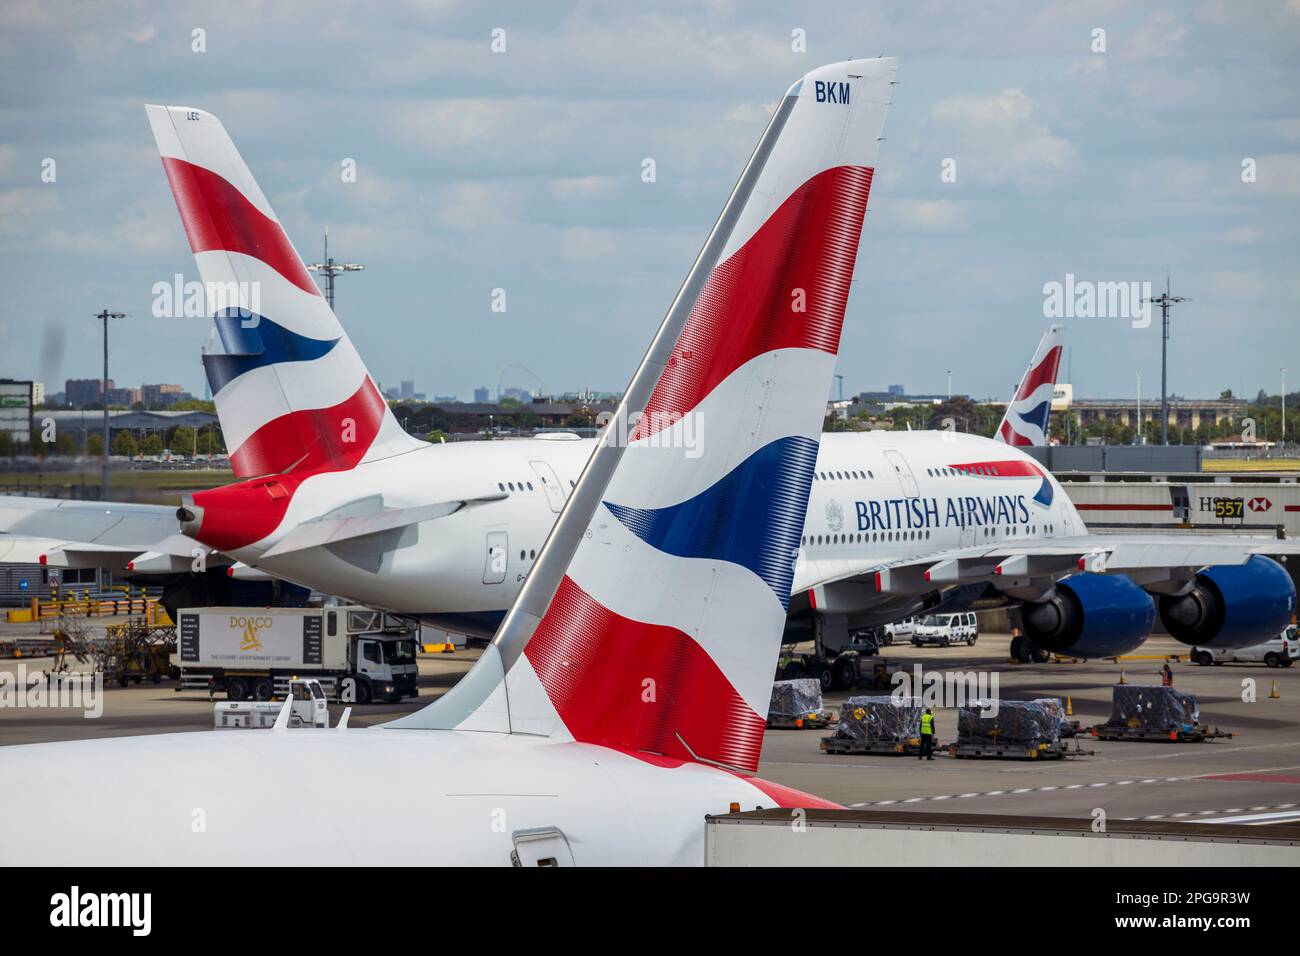 June 12, 2022, London, England, UK: With red white and blue tail livery ...